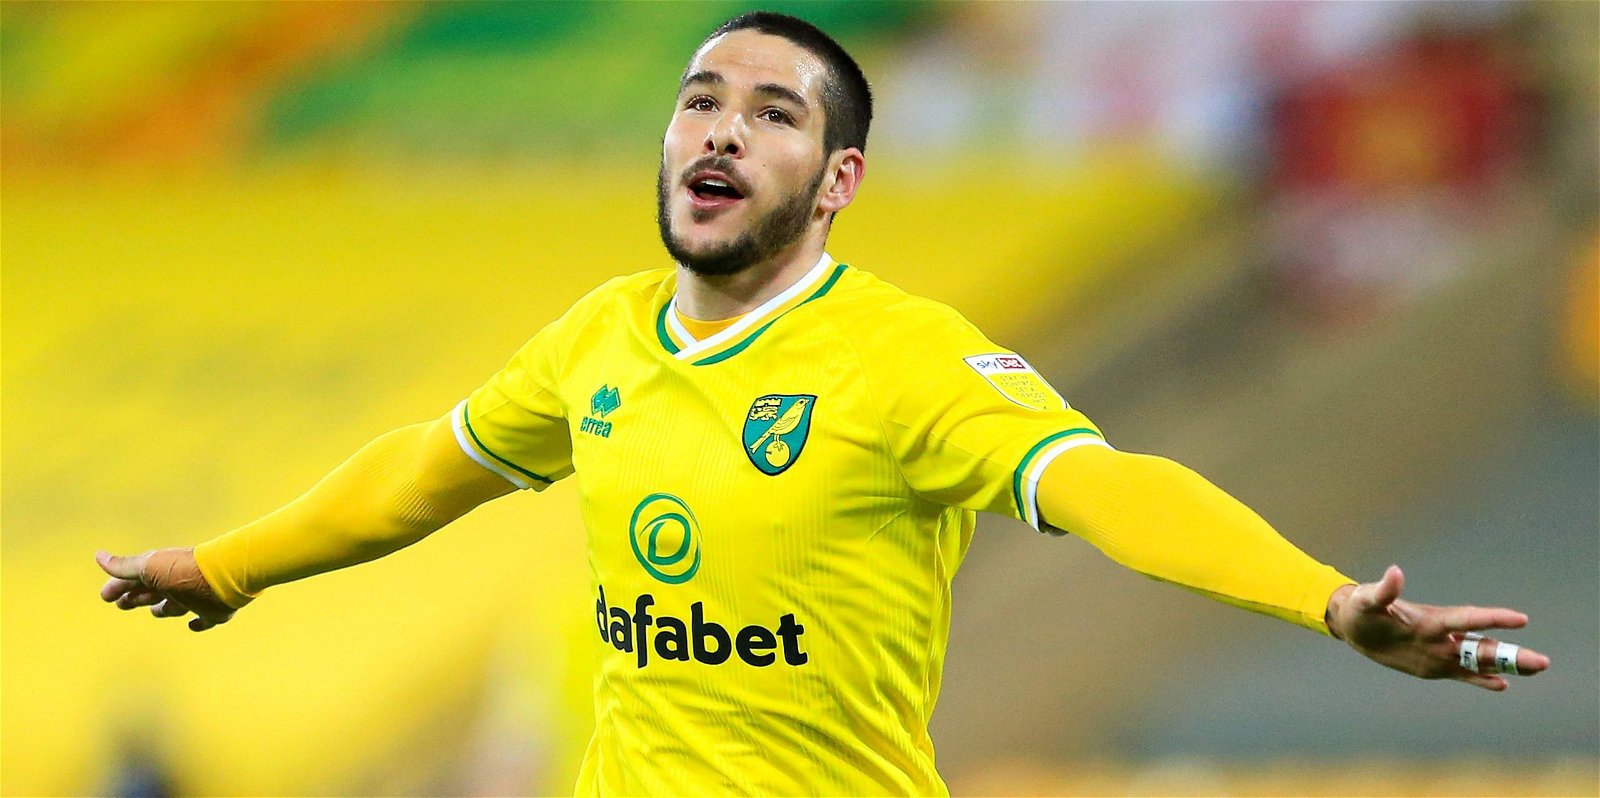 Leeds United, &#8216;Cannot refuse&#8217; &#8211; Chris Sutton urges Norwich City to &#8216;pull out all the stops&#8217; with Emi Buendia